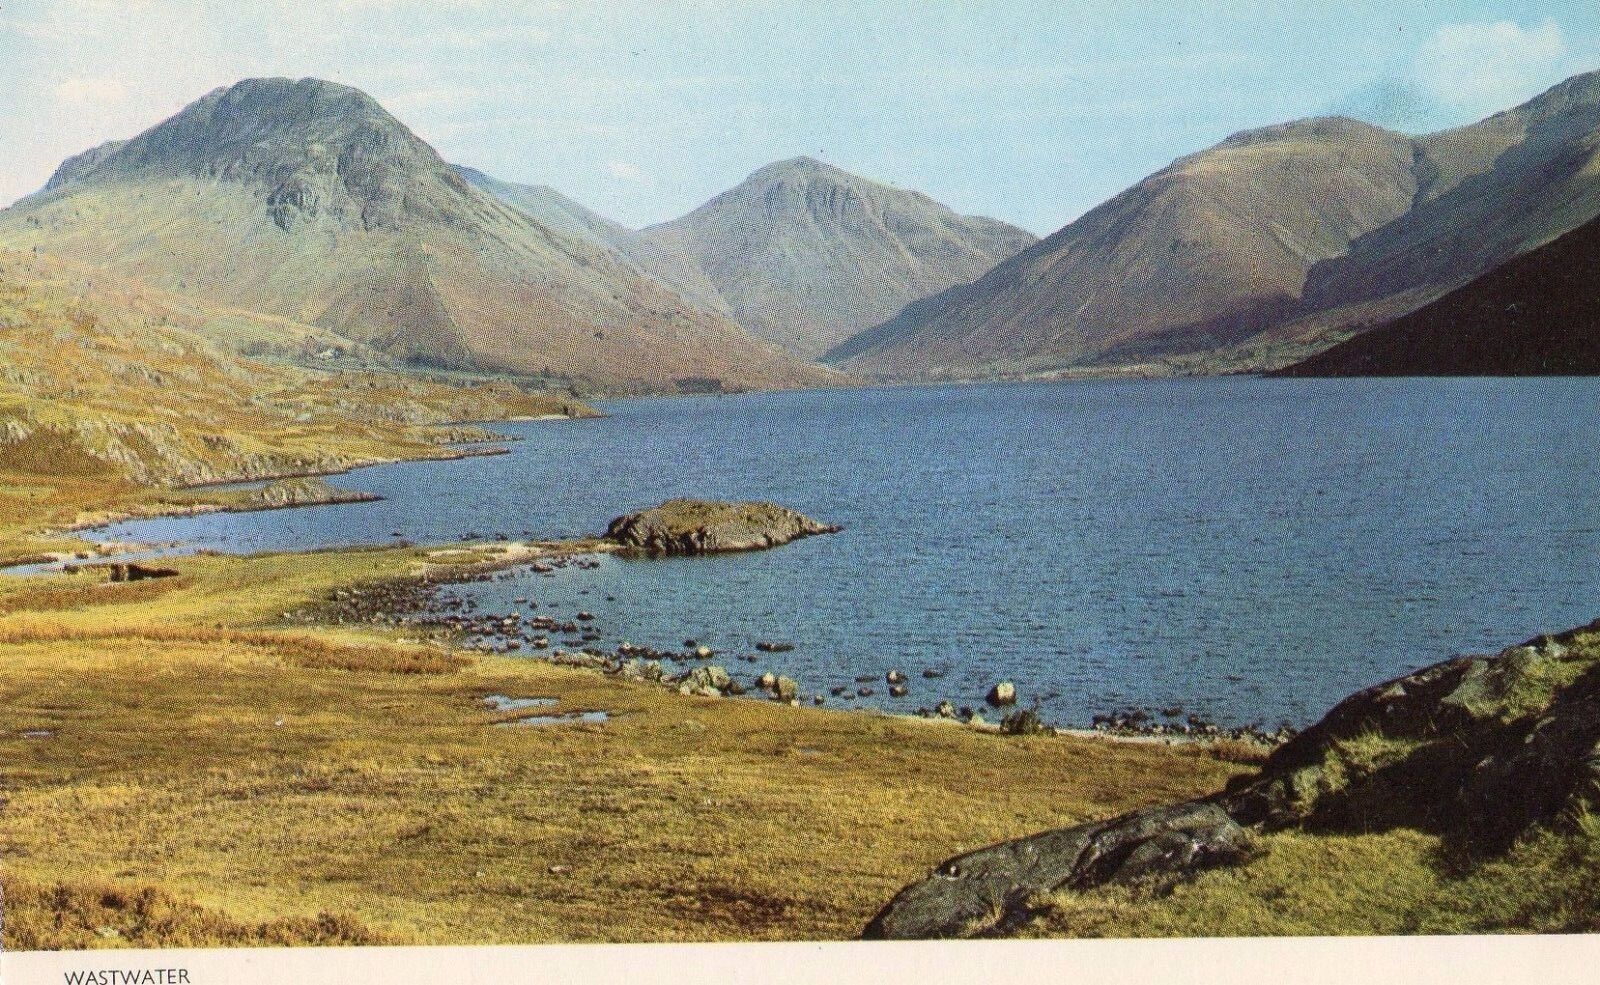 House Clearance - Lakeland Service "Wastwater" (Unused) Published by Cotman-Color